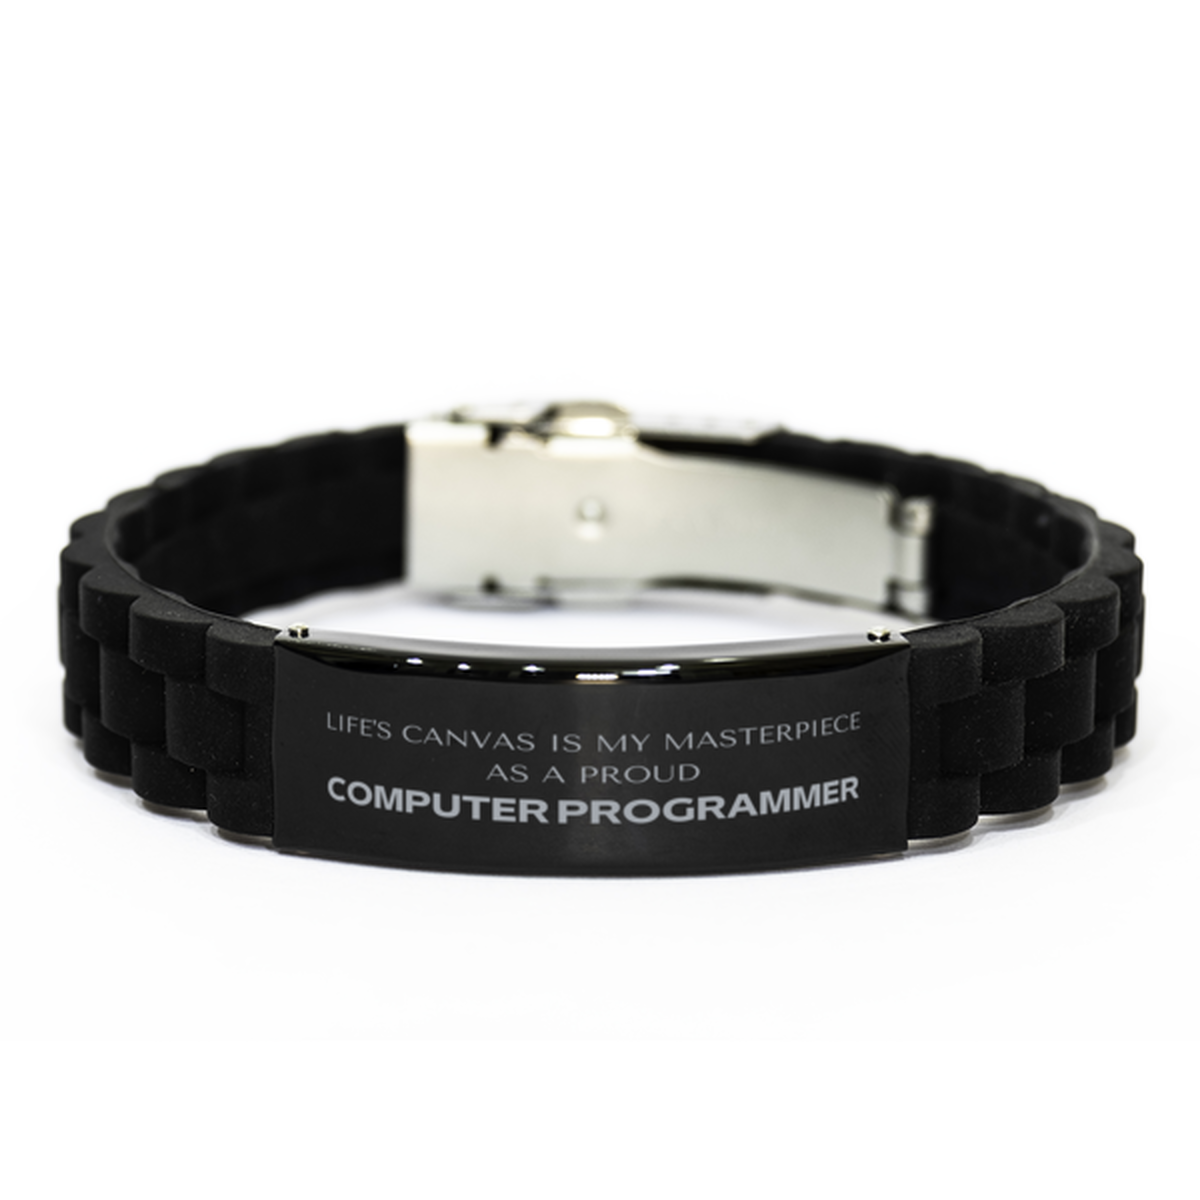 Proud Computer Programmer Gifts, Life's canvas is my masterpiece, Epic Birthday Christmas Unique Black Glidelock Clasp Bracelet For Computer Programmer, Coworkers, Men, Women, Friends